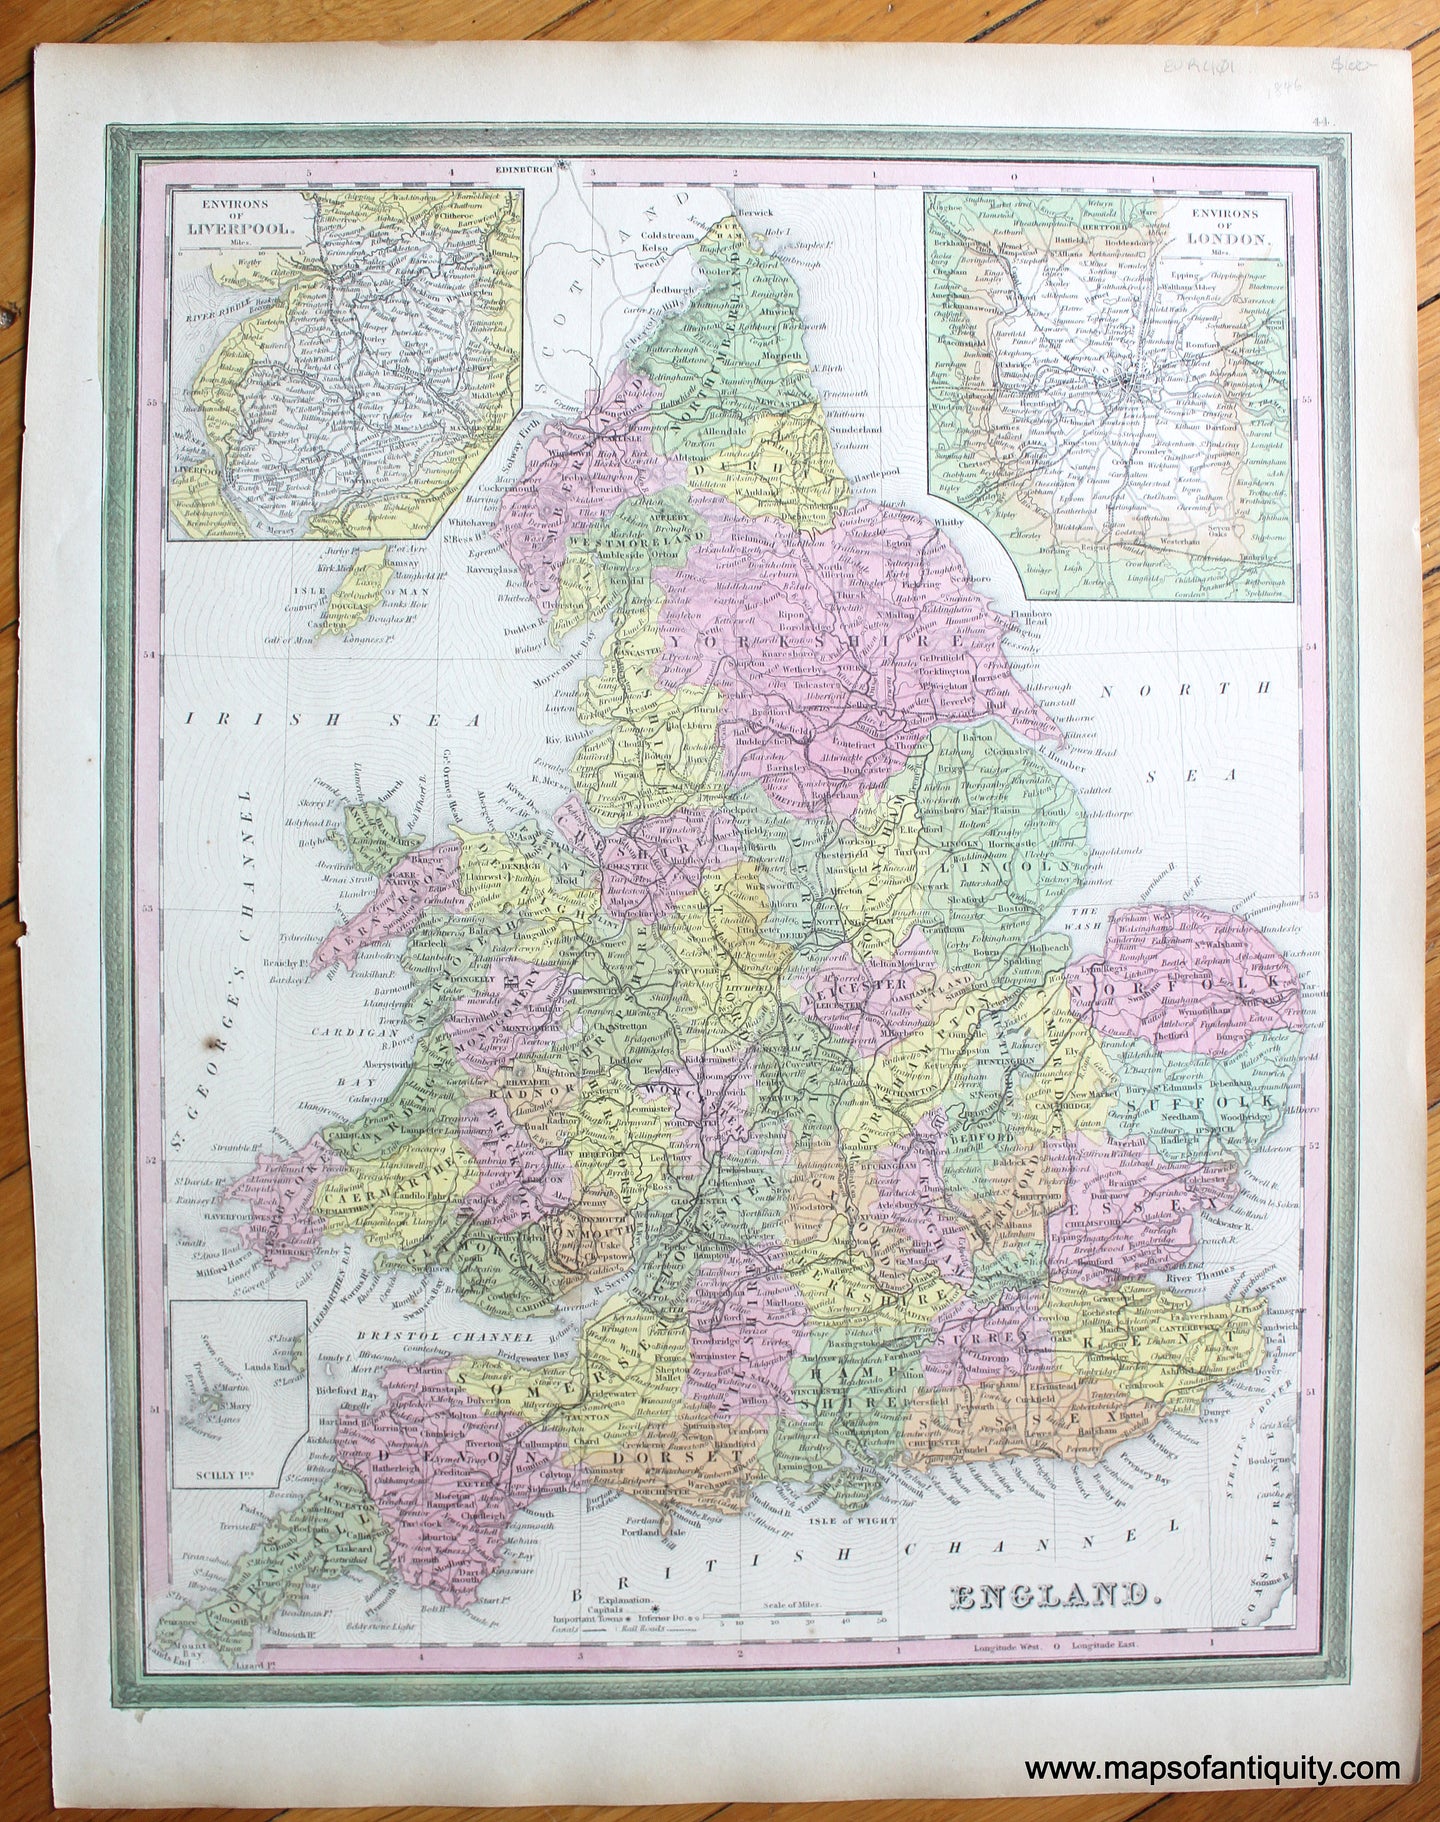 Antique-Map-of-England.